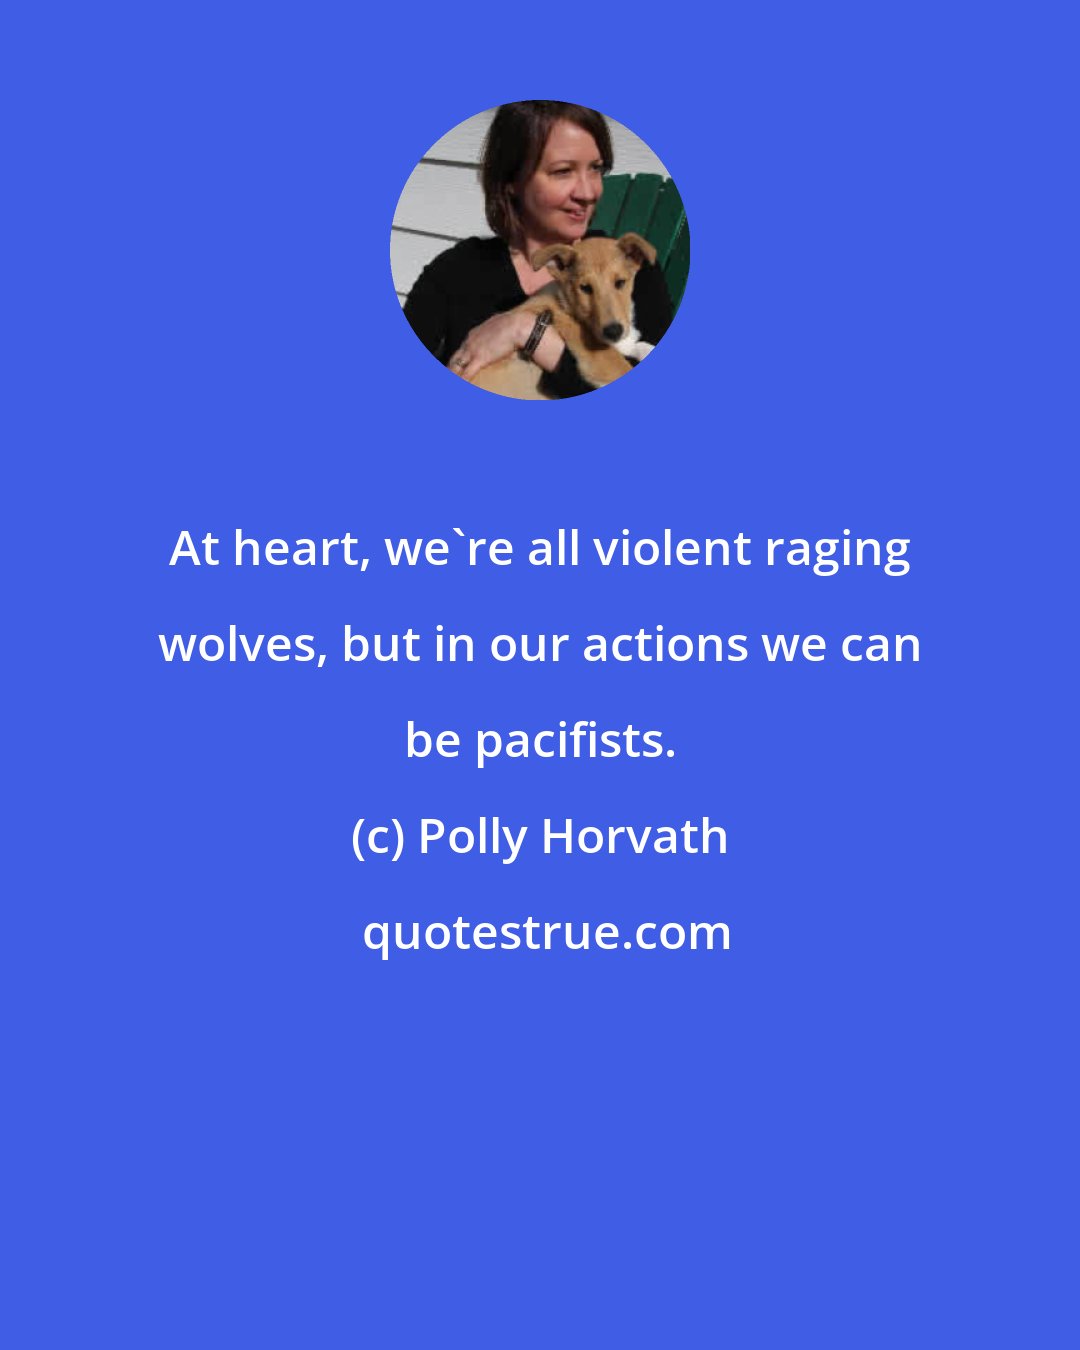 Polly Horvath: At heart, we're all violent raging wolves, but in our actions we can be pacifists.